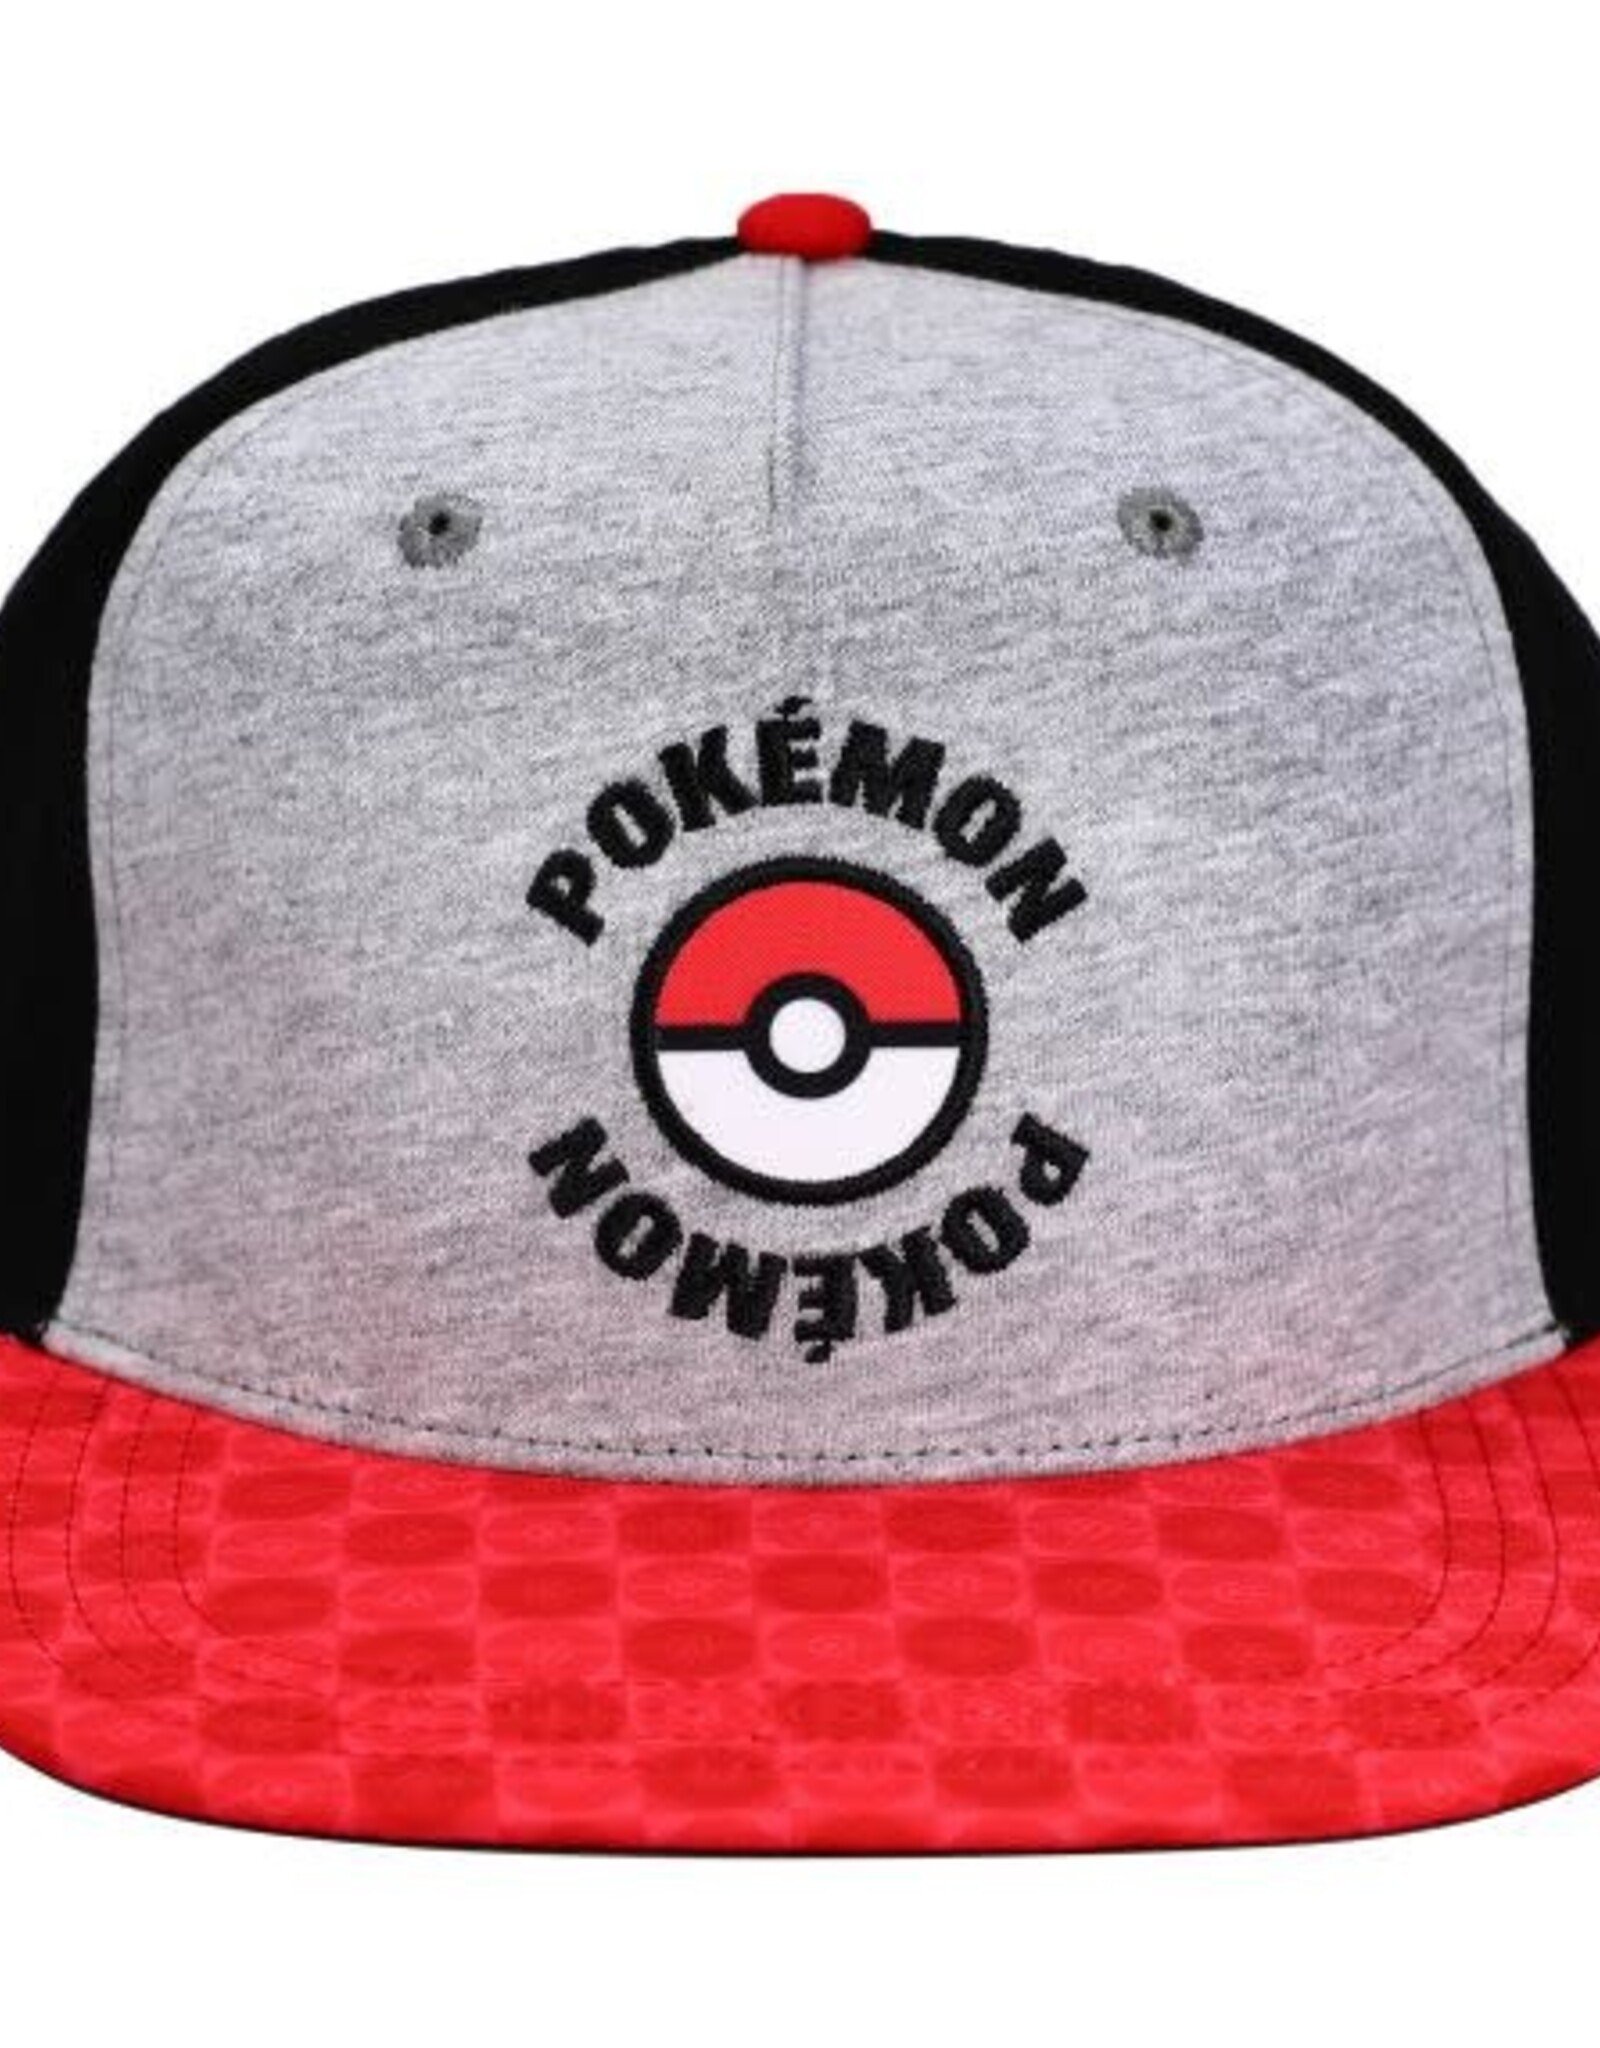 POKÉMON - GREY AND RED POKEBALL HAT - YOUTH